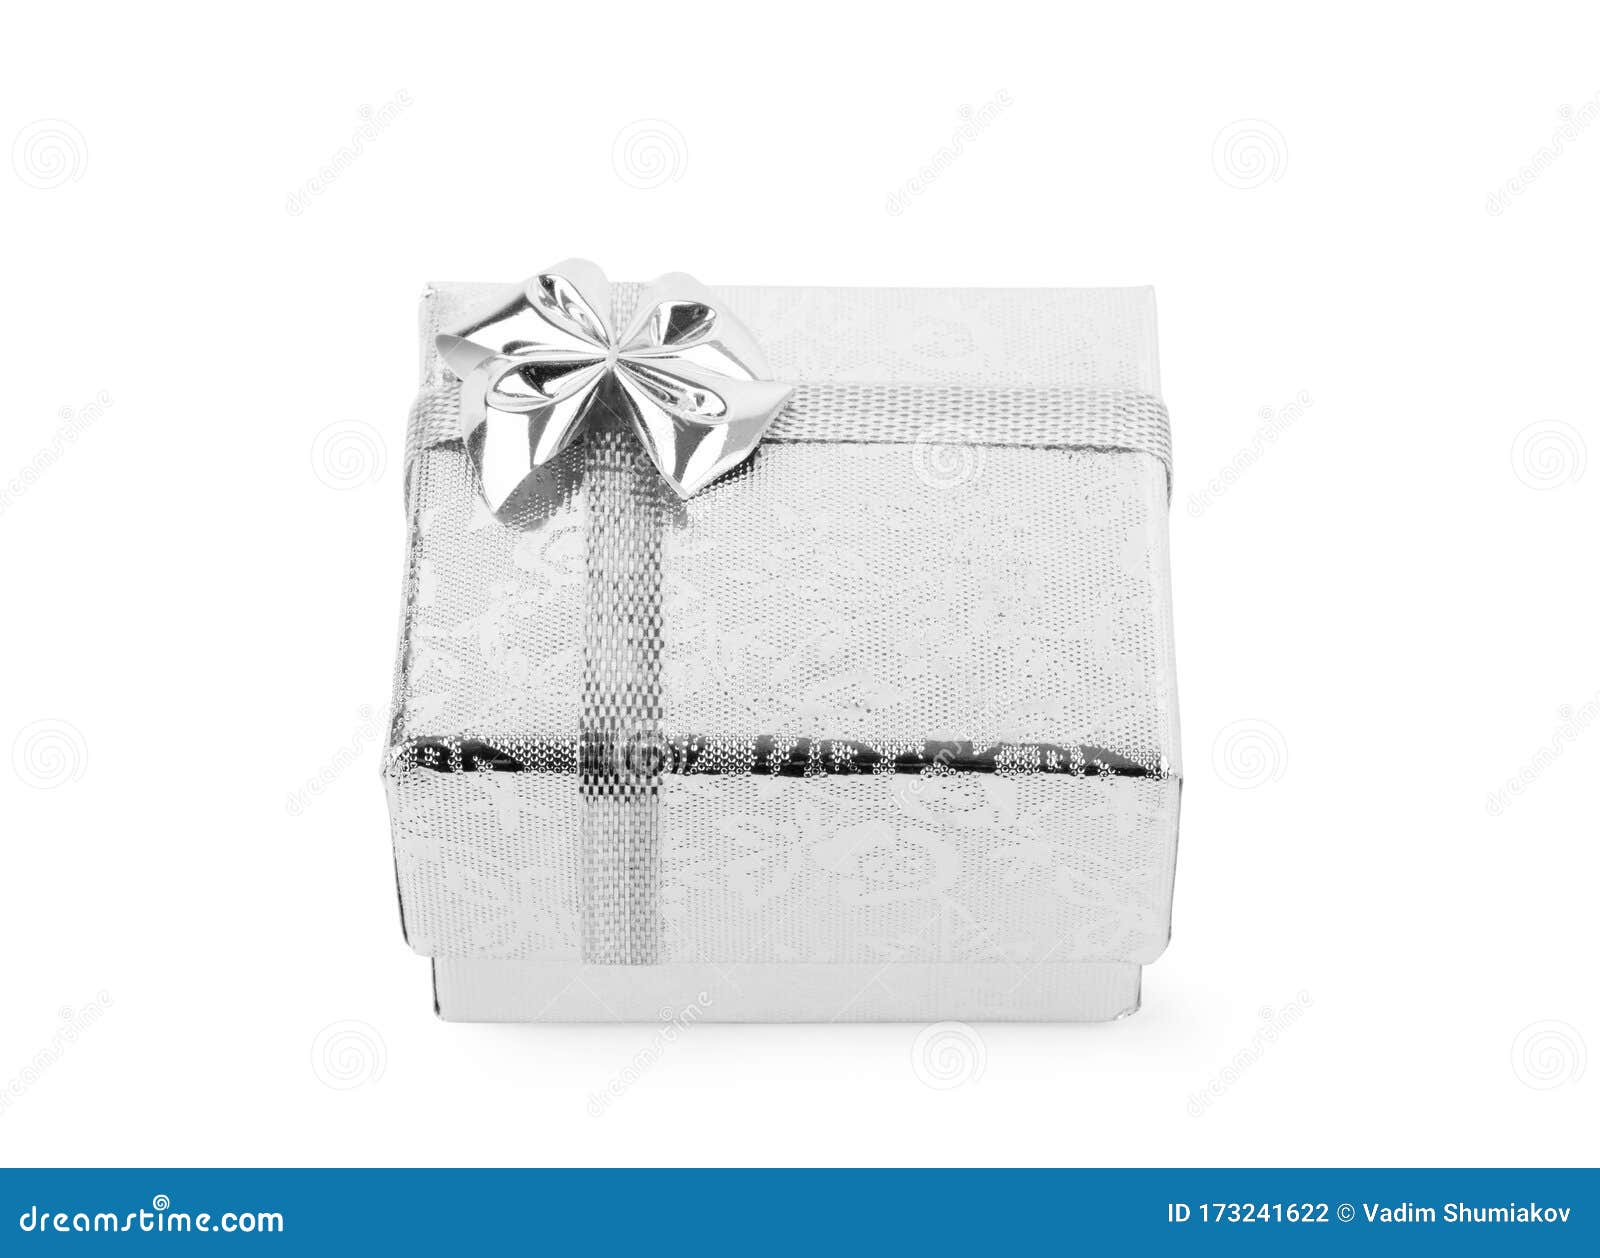 gift box  on a white background